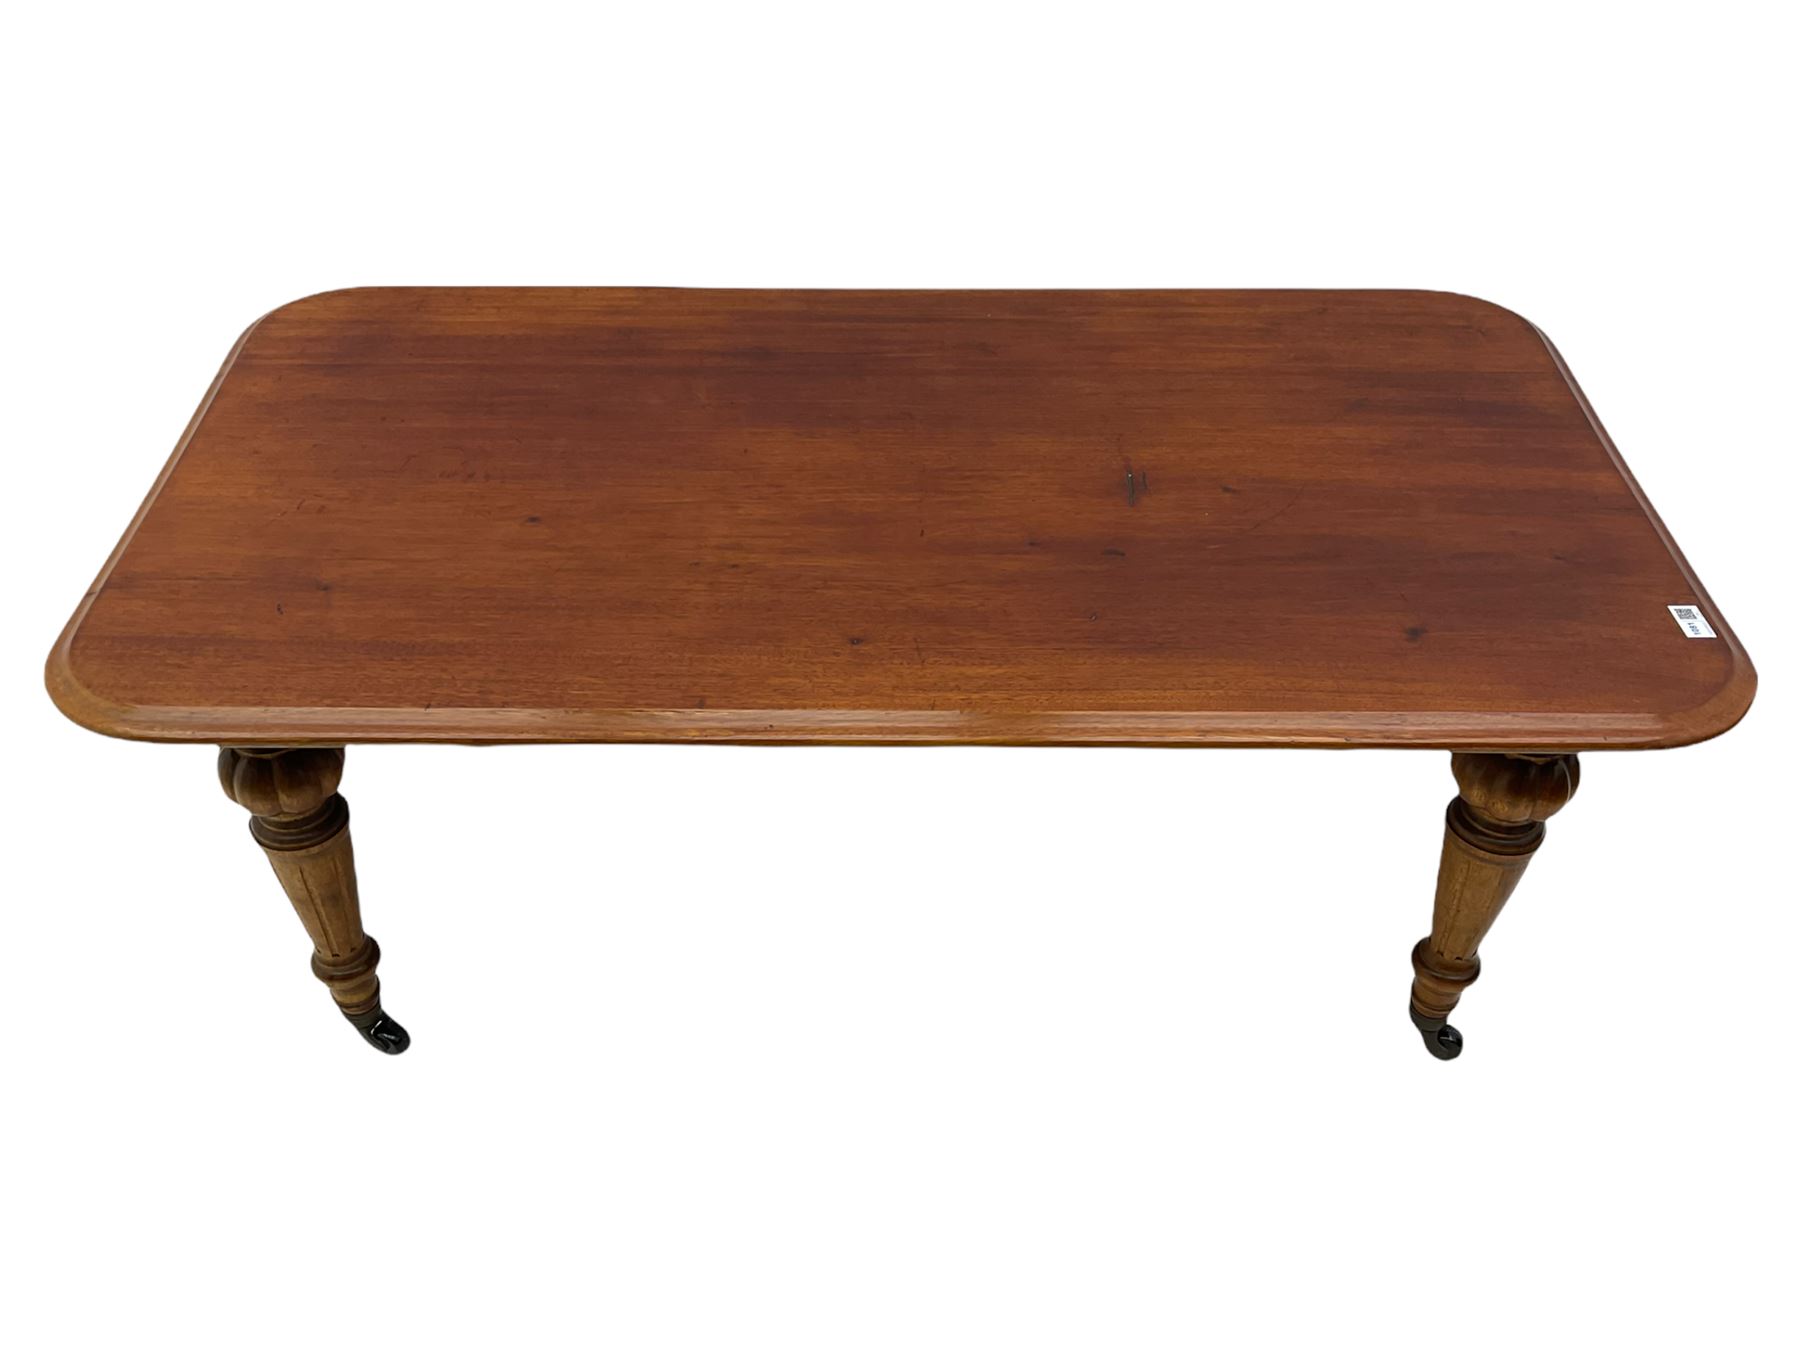 Victorian and later mahogany low table - Image 2 of 7